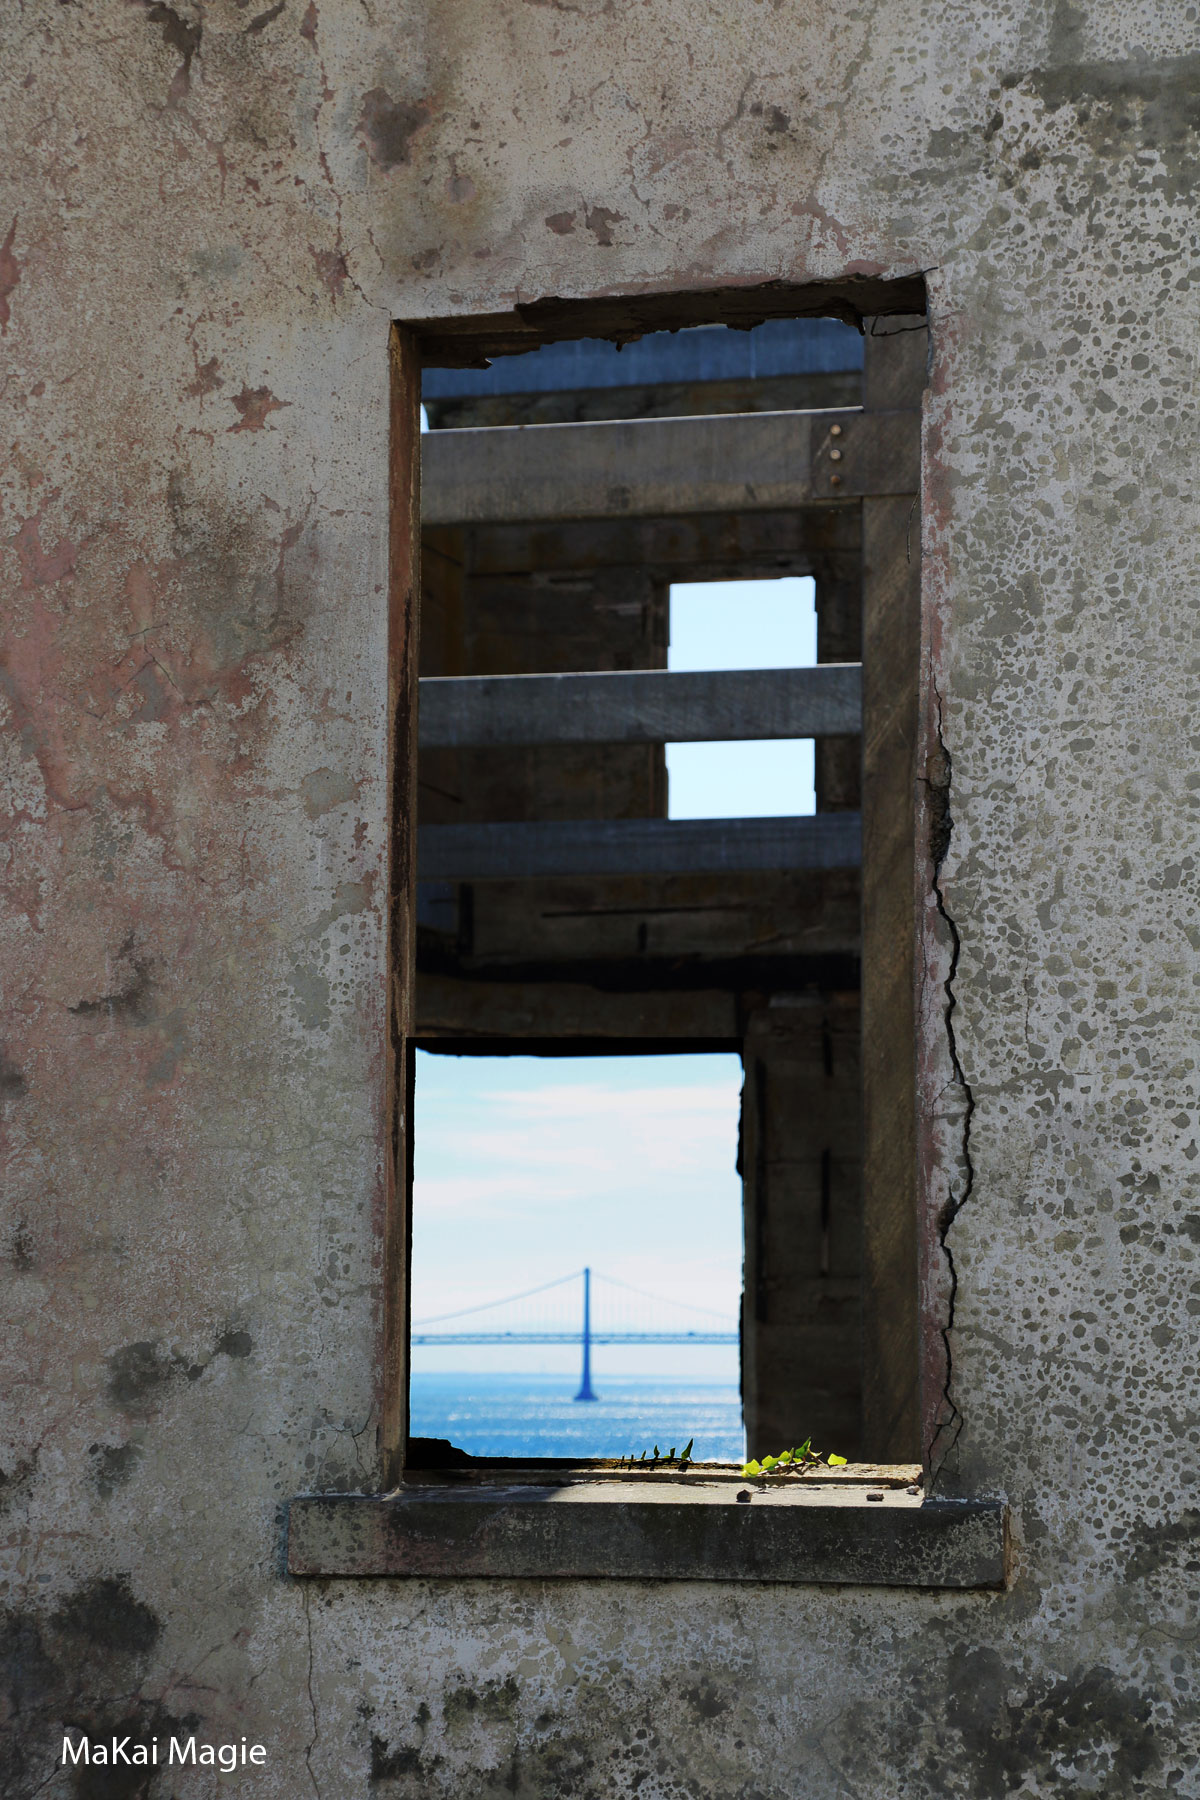 Photo of a narrow window in a worn stone wall, looking out at the San Francisco Bay Bridge above blue water.